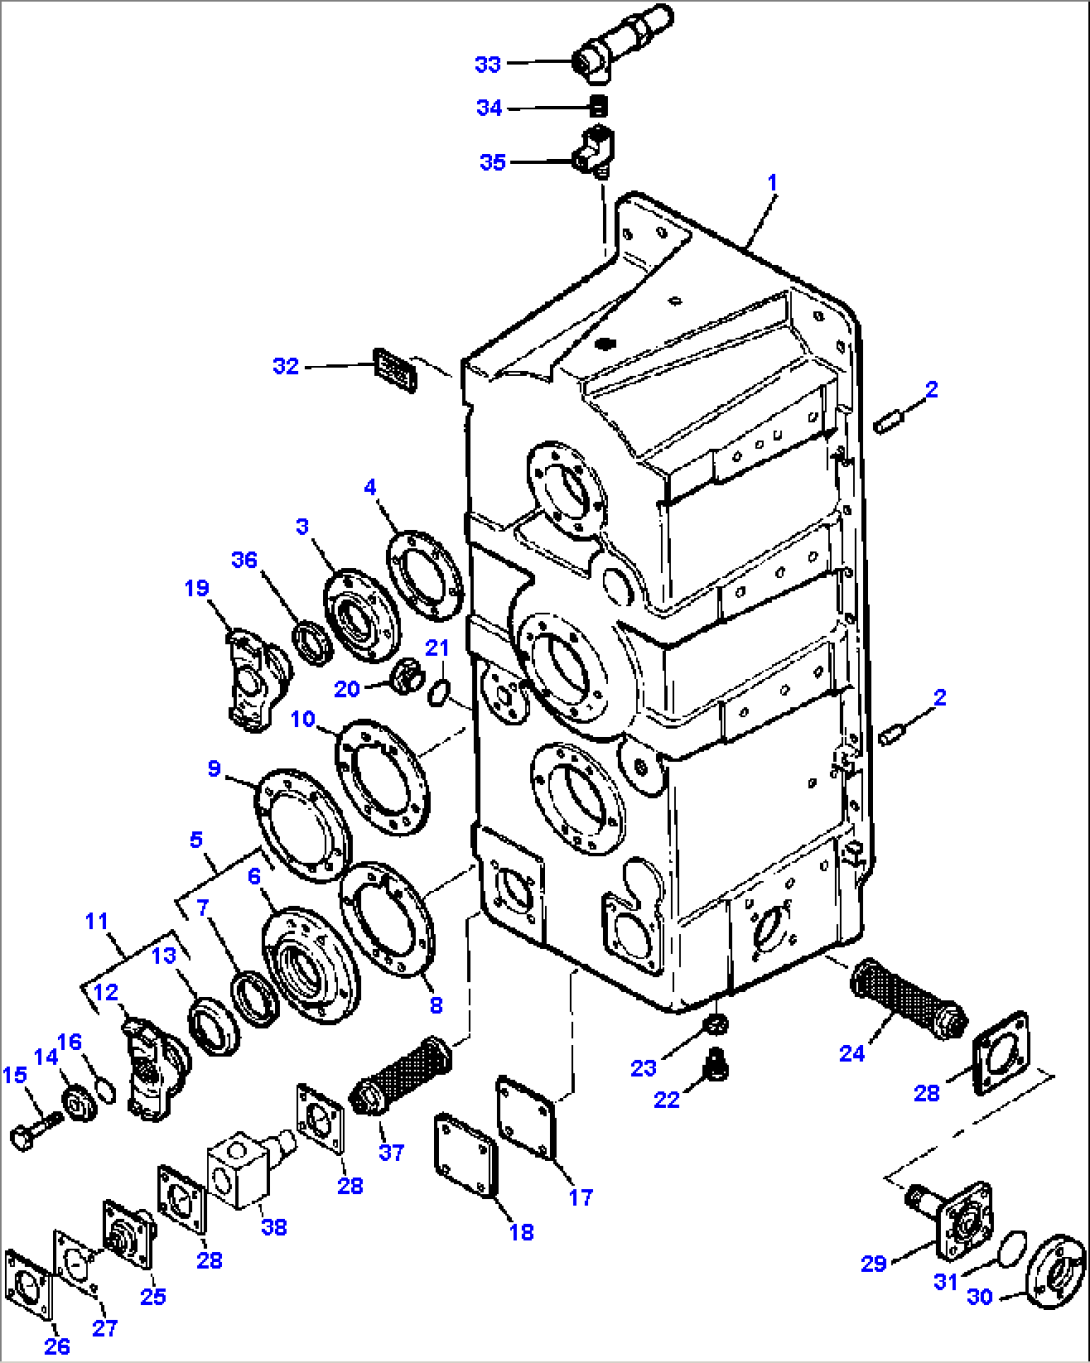 TRANSMISSION HOUSING AND EXTERNAL PARTS